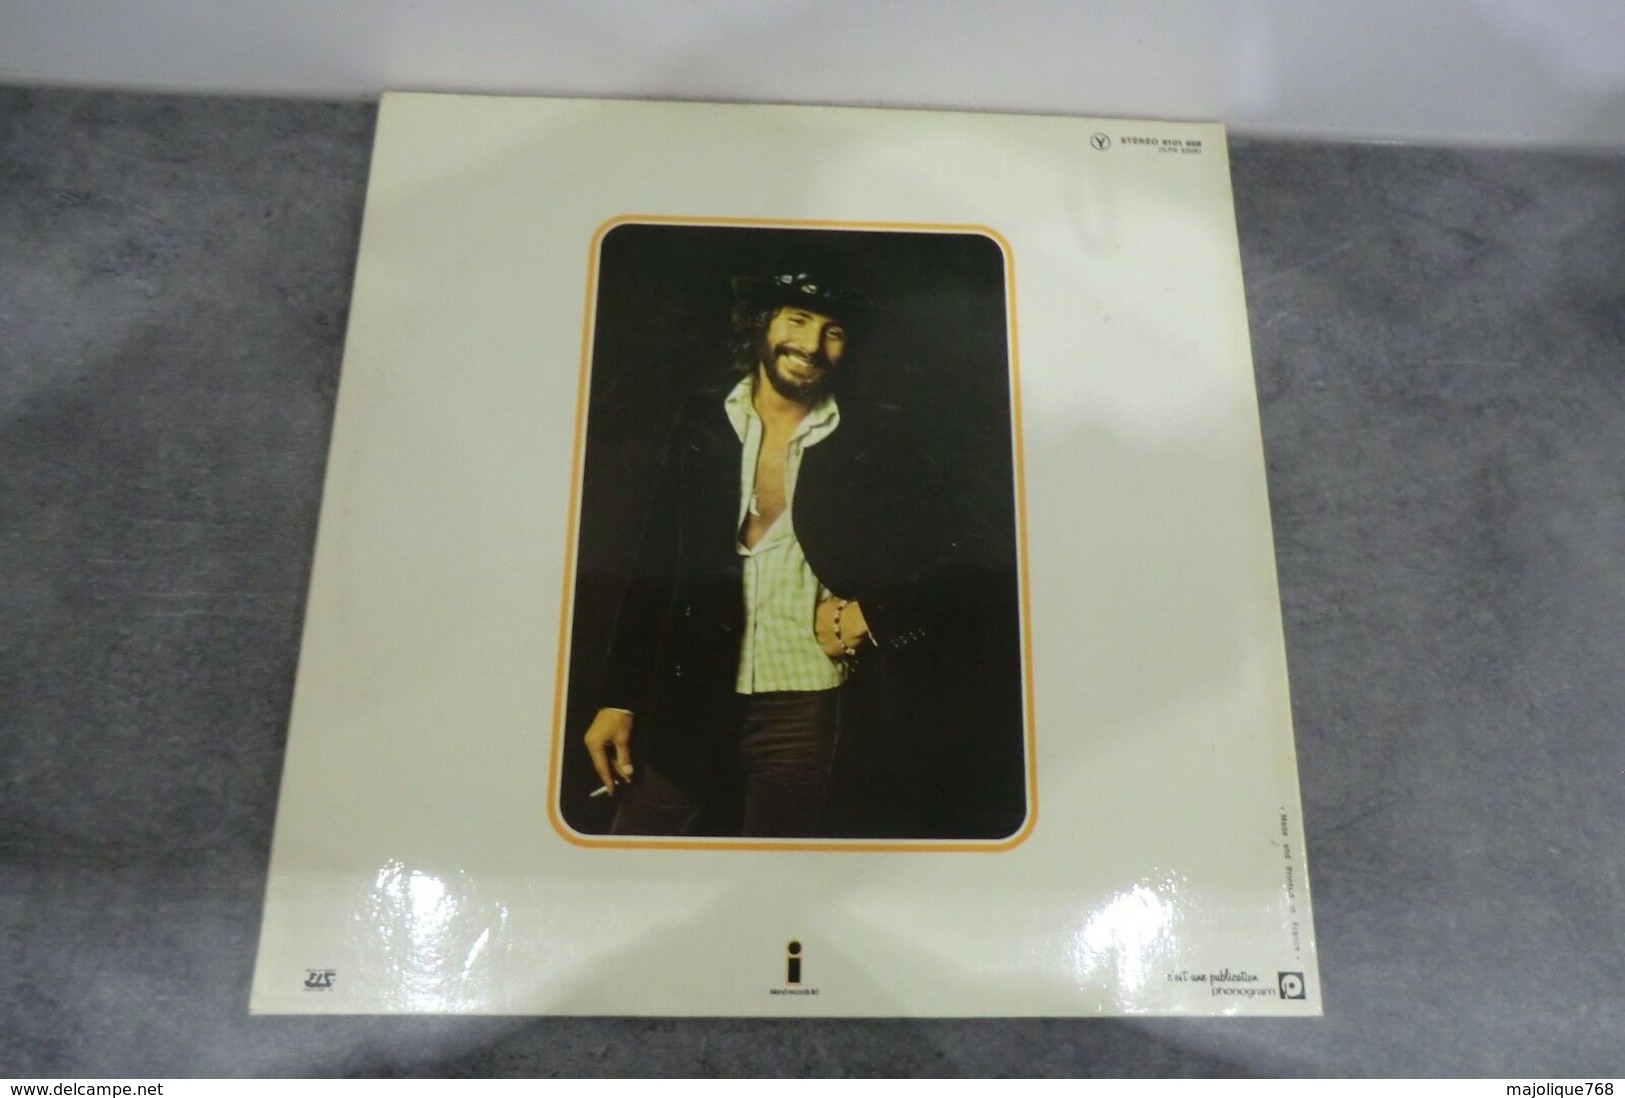 Disque - Cat Stevens - Catch Bull At Four - Island Records 9101659 - ILPS 9203 -1972 - Rock